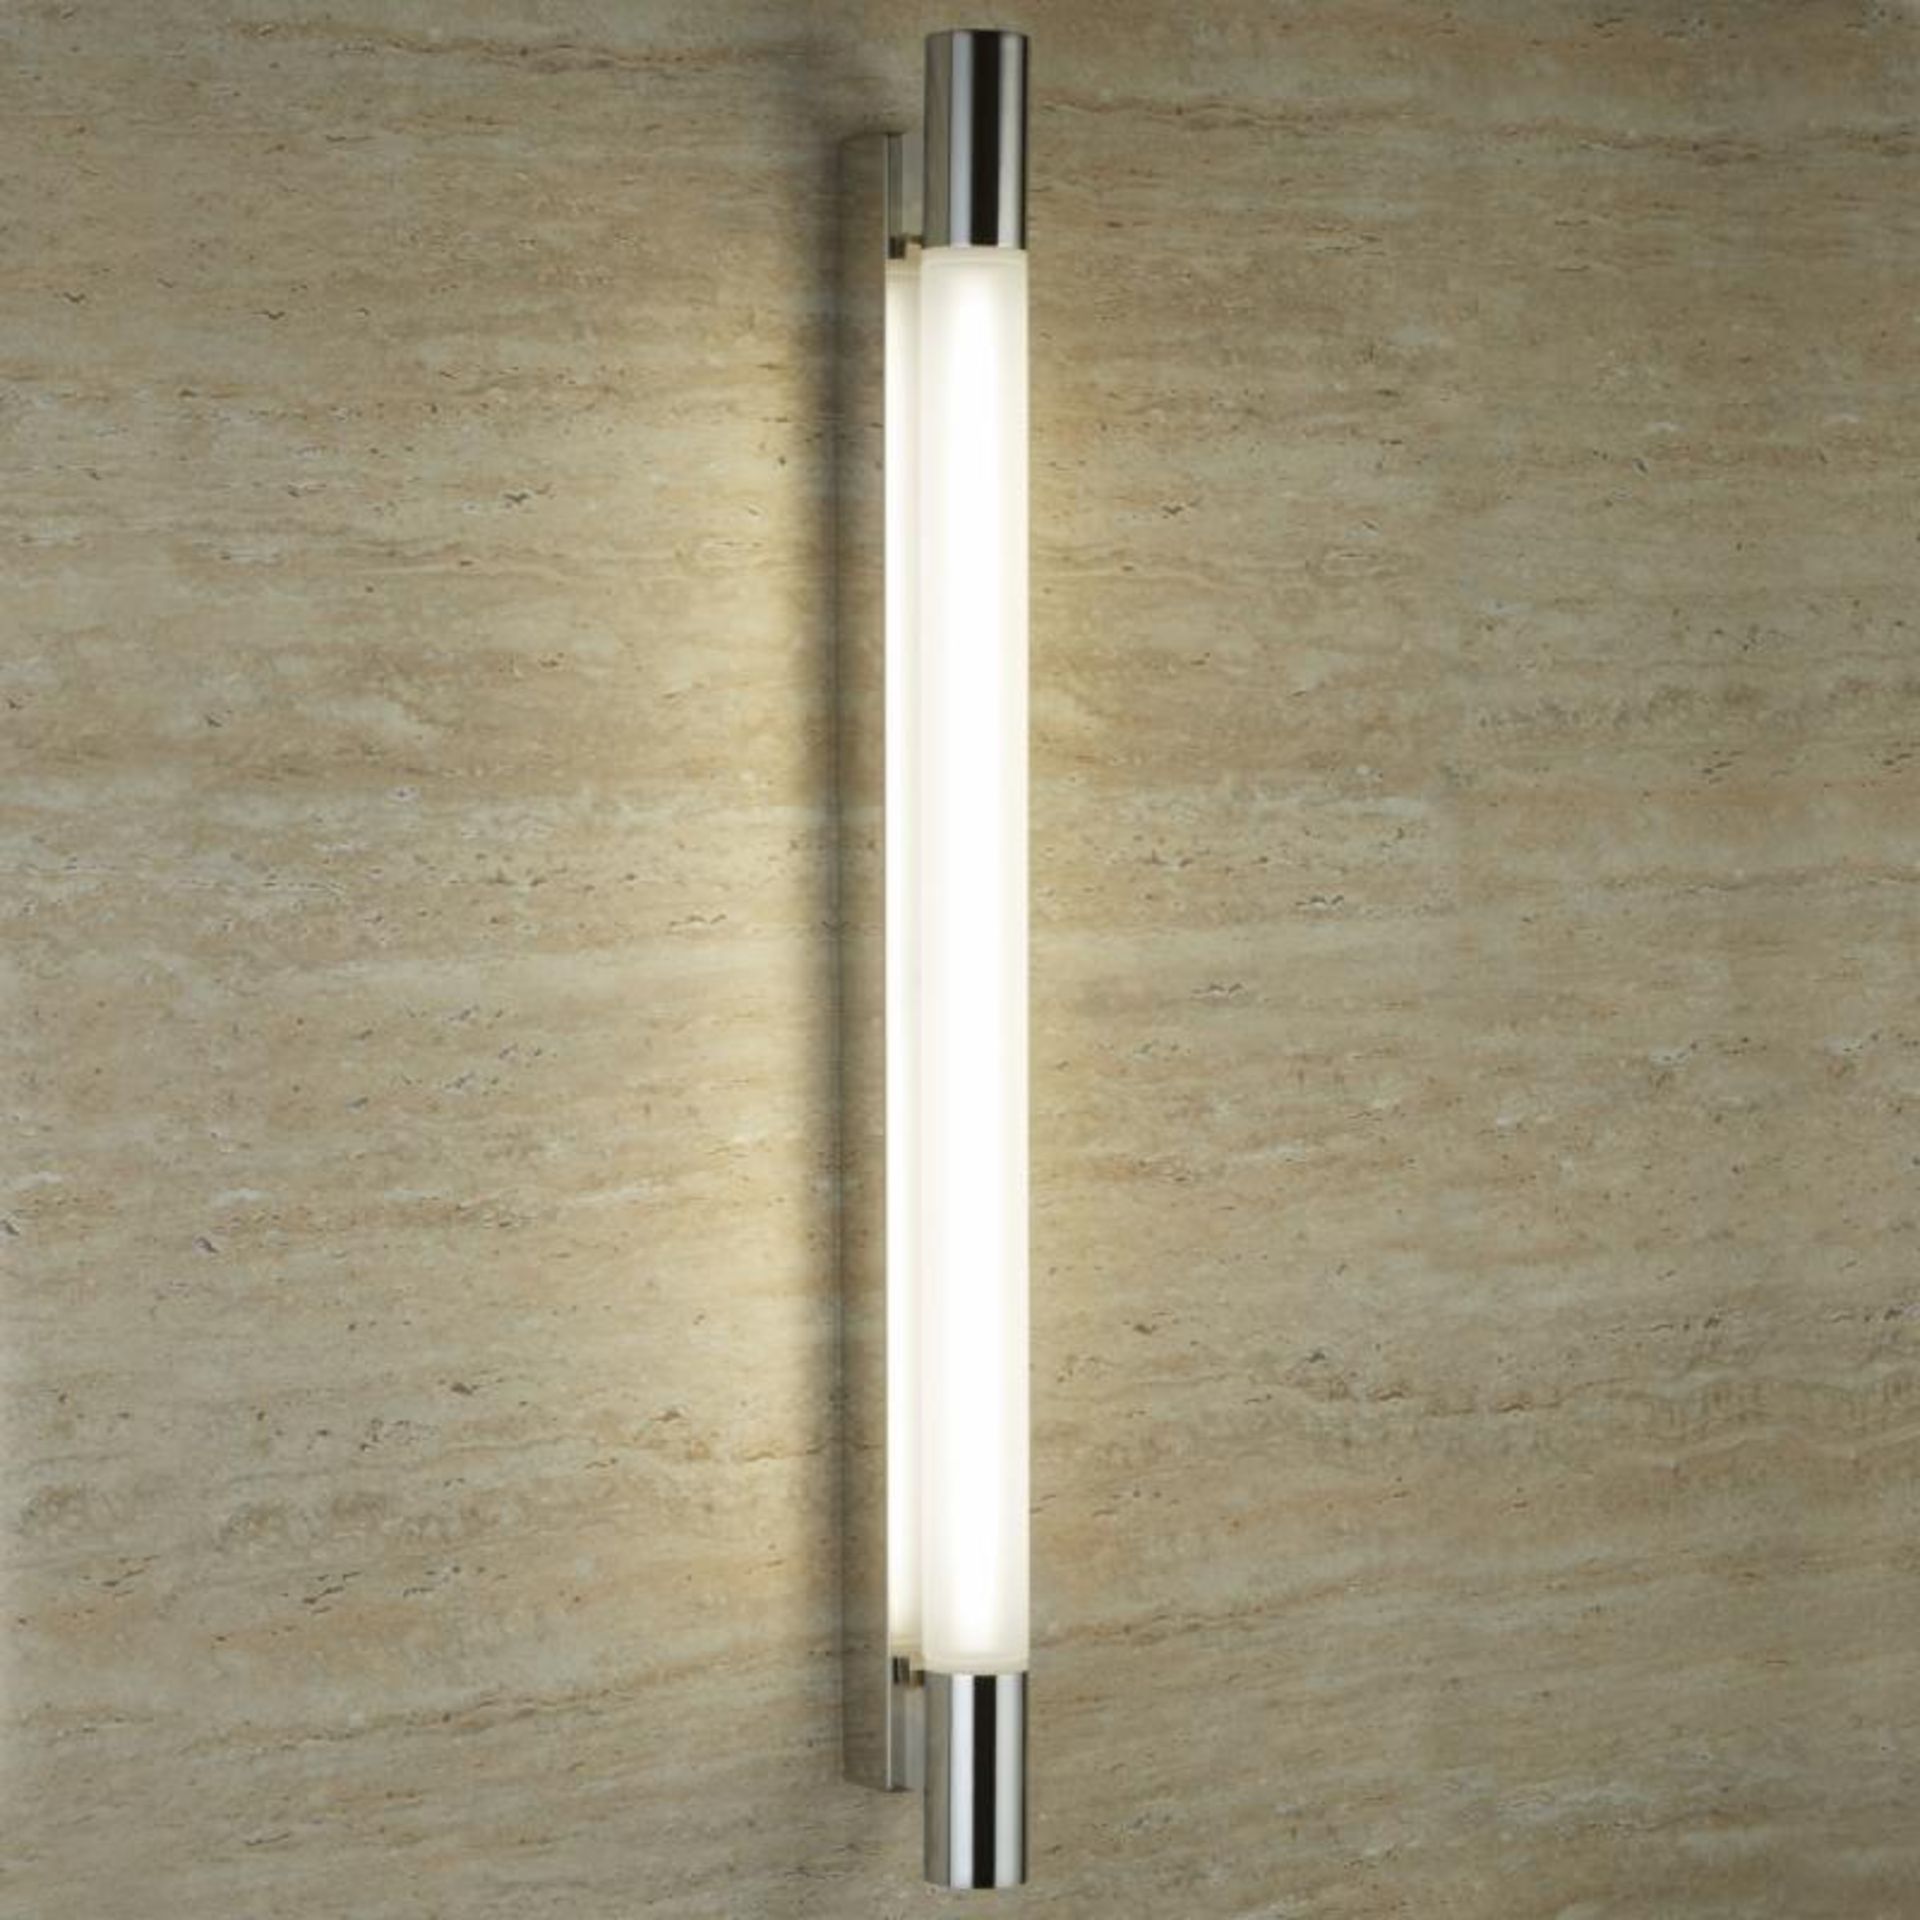 2 x Bathroom Wall Light With Chrome Finish and Frosted Glass Shade - T5 IP44 Rated - New Boxed Stock